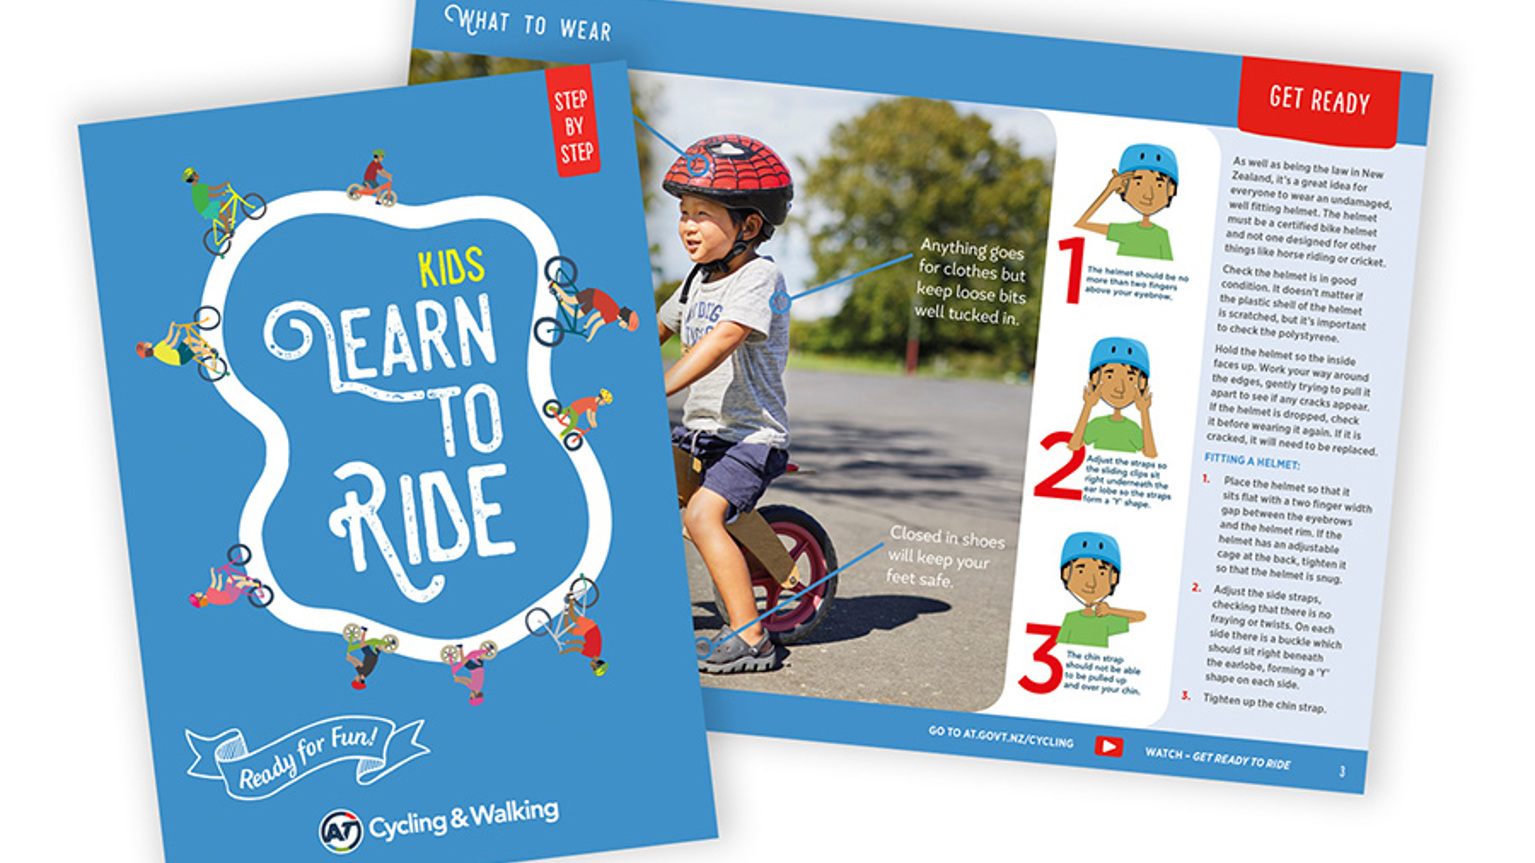 Kids learn to ride booklet front cover and open spread.